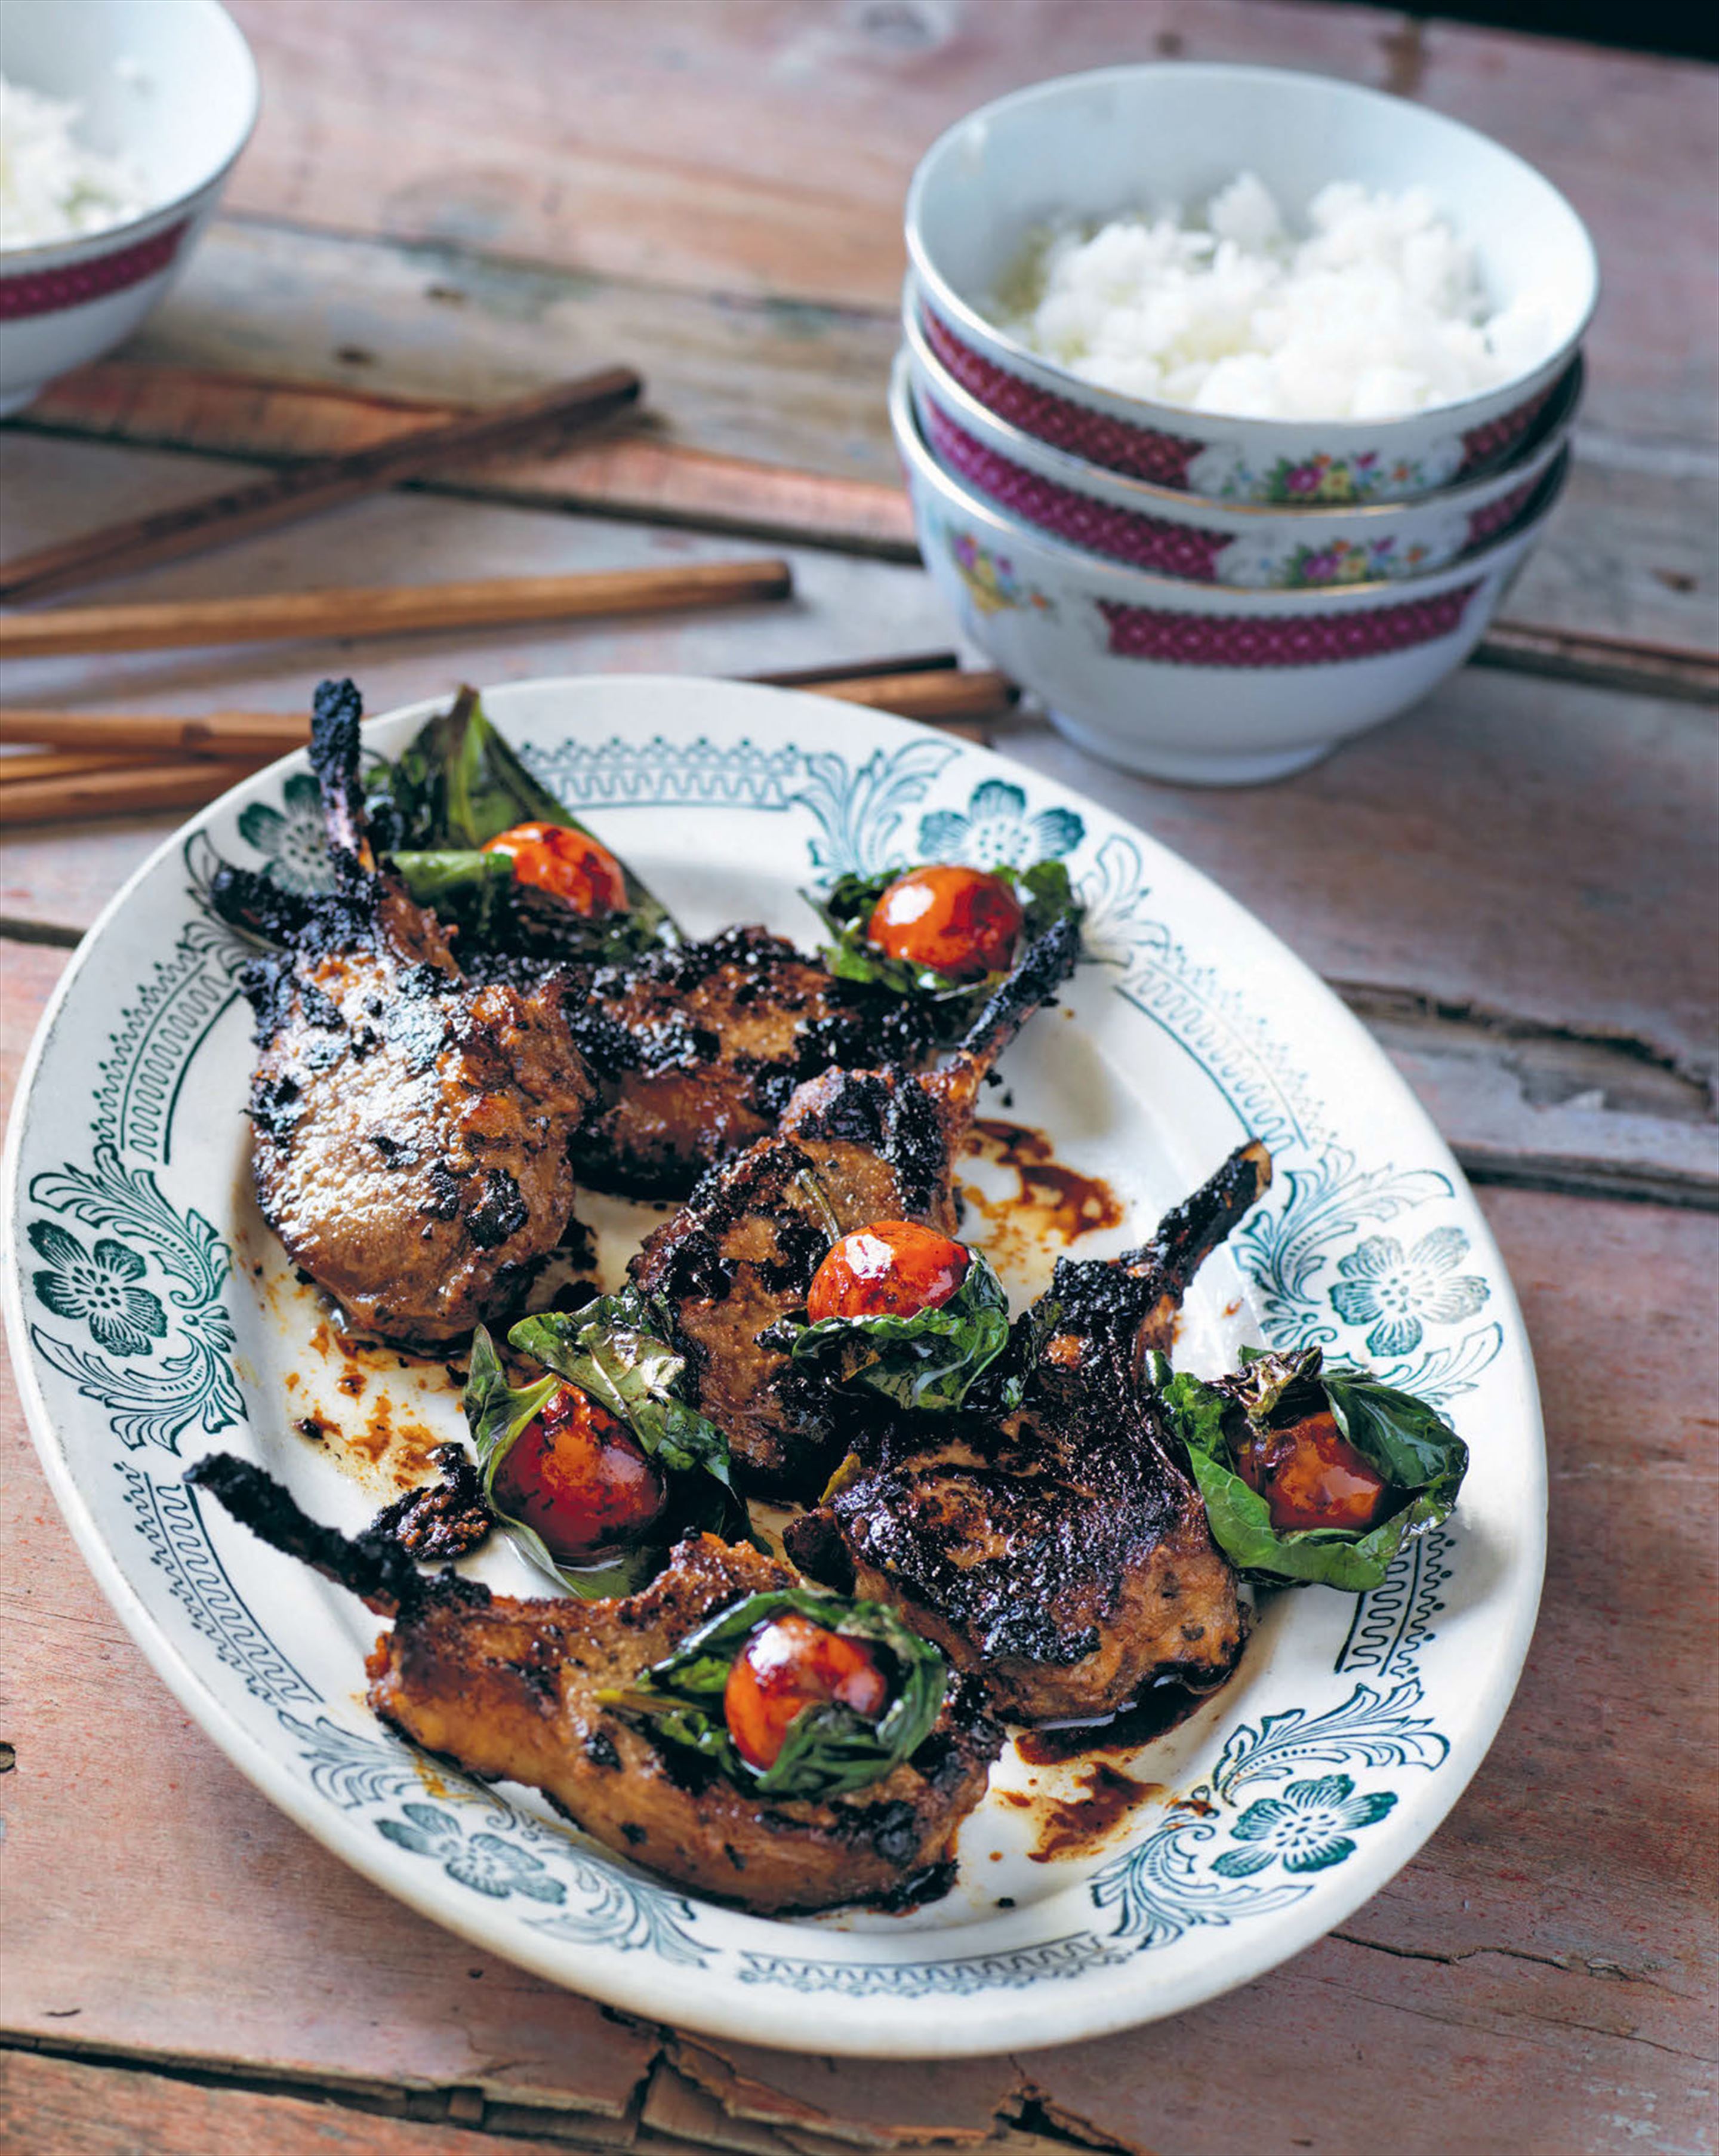 Lamb cutlets cooked in Vietnamese miso